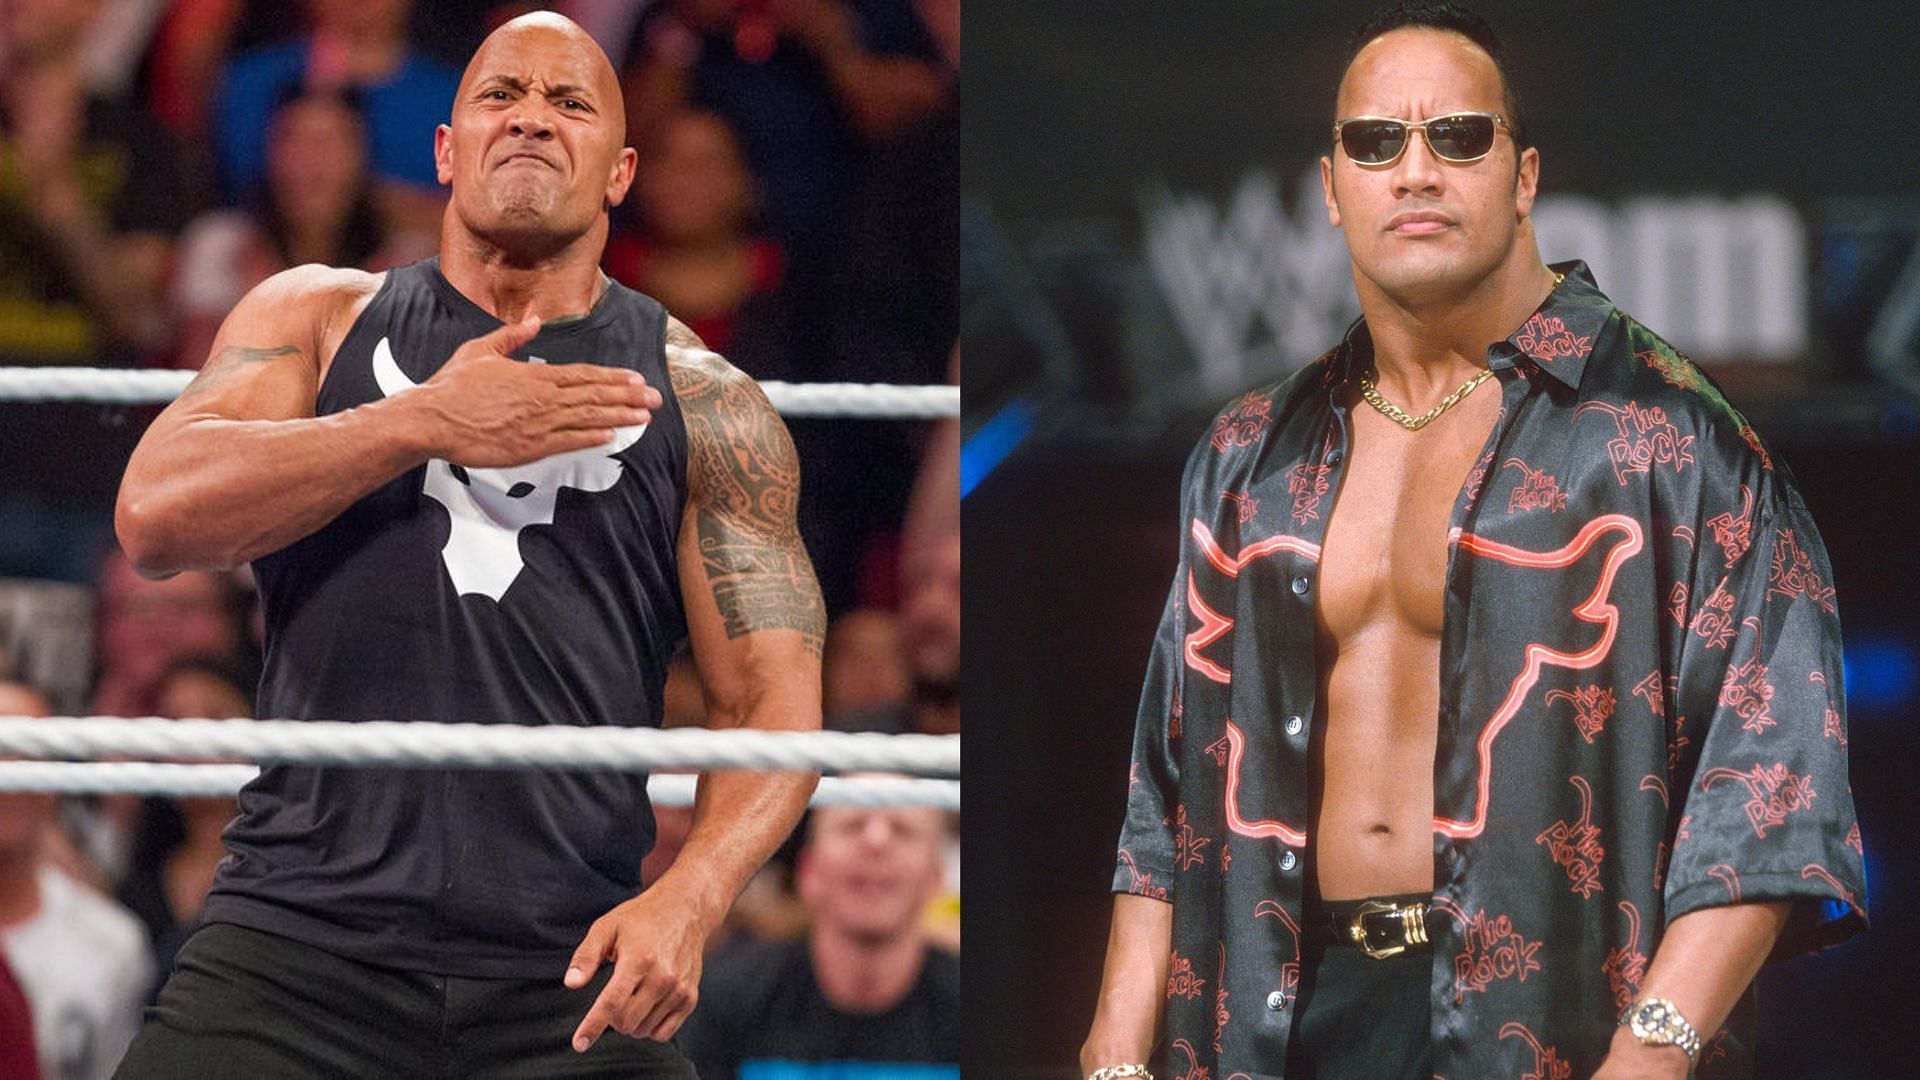 The Rock recently joined the TKO board of directors